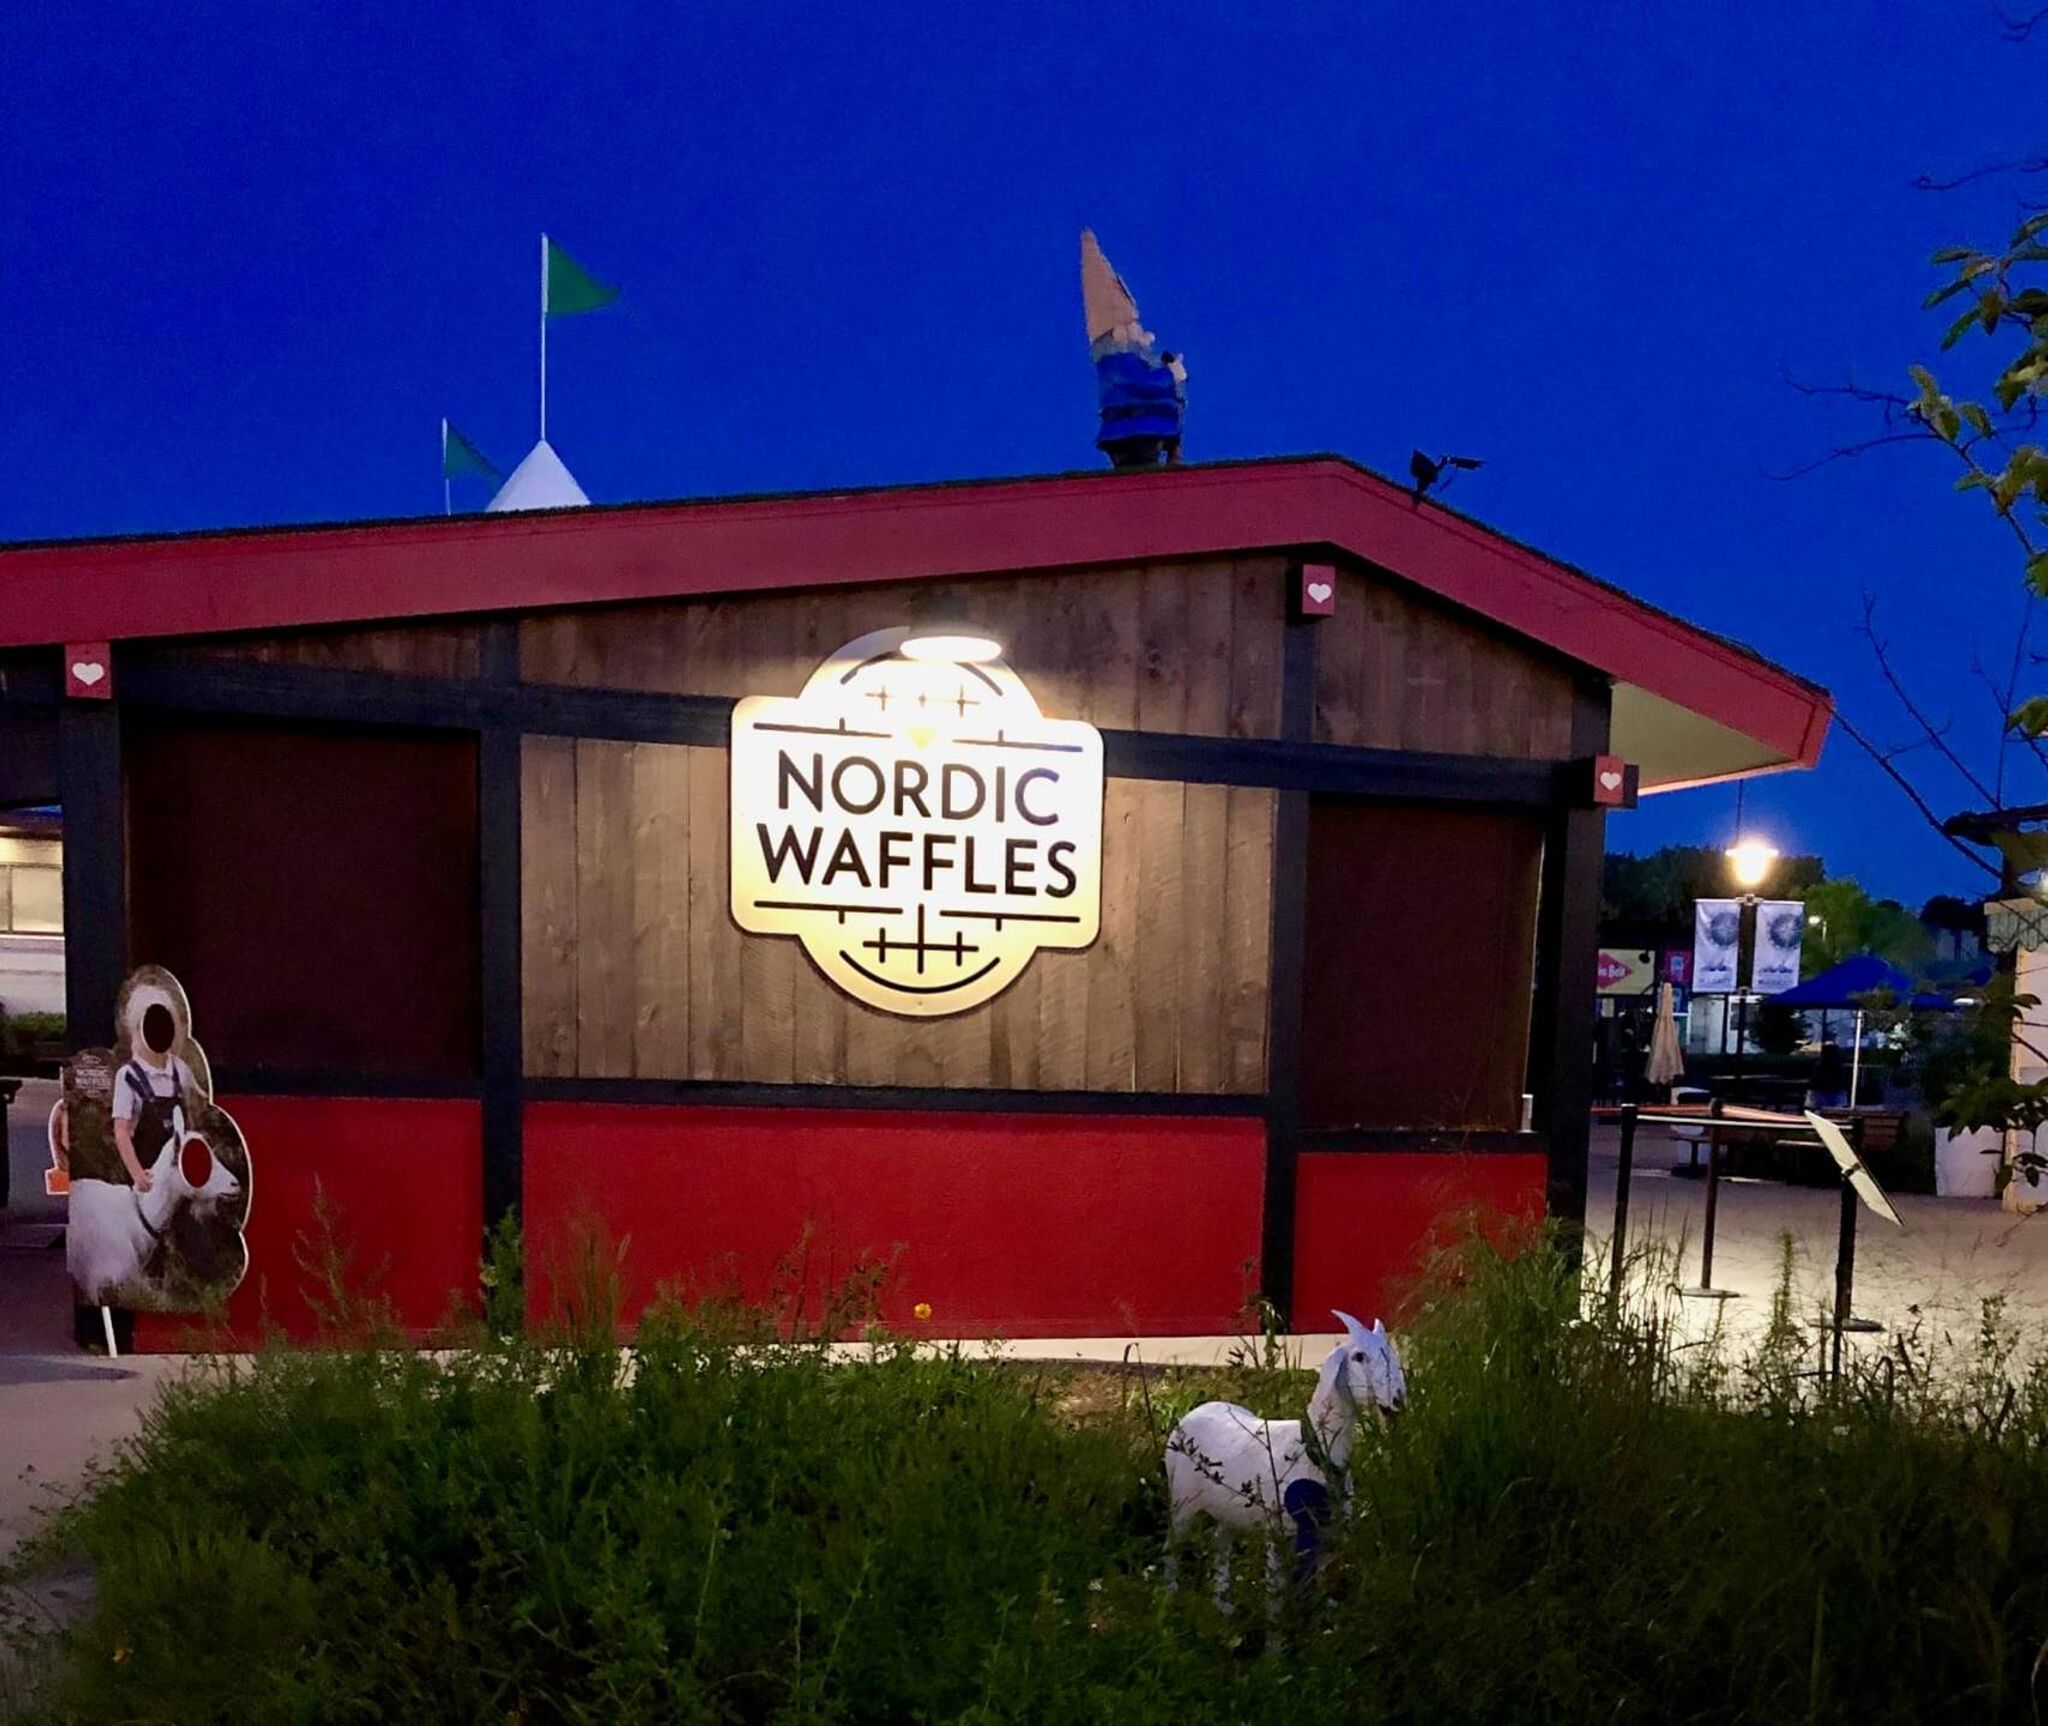 The Nordic Waffles booth at the Minnesota State Fair.